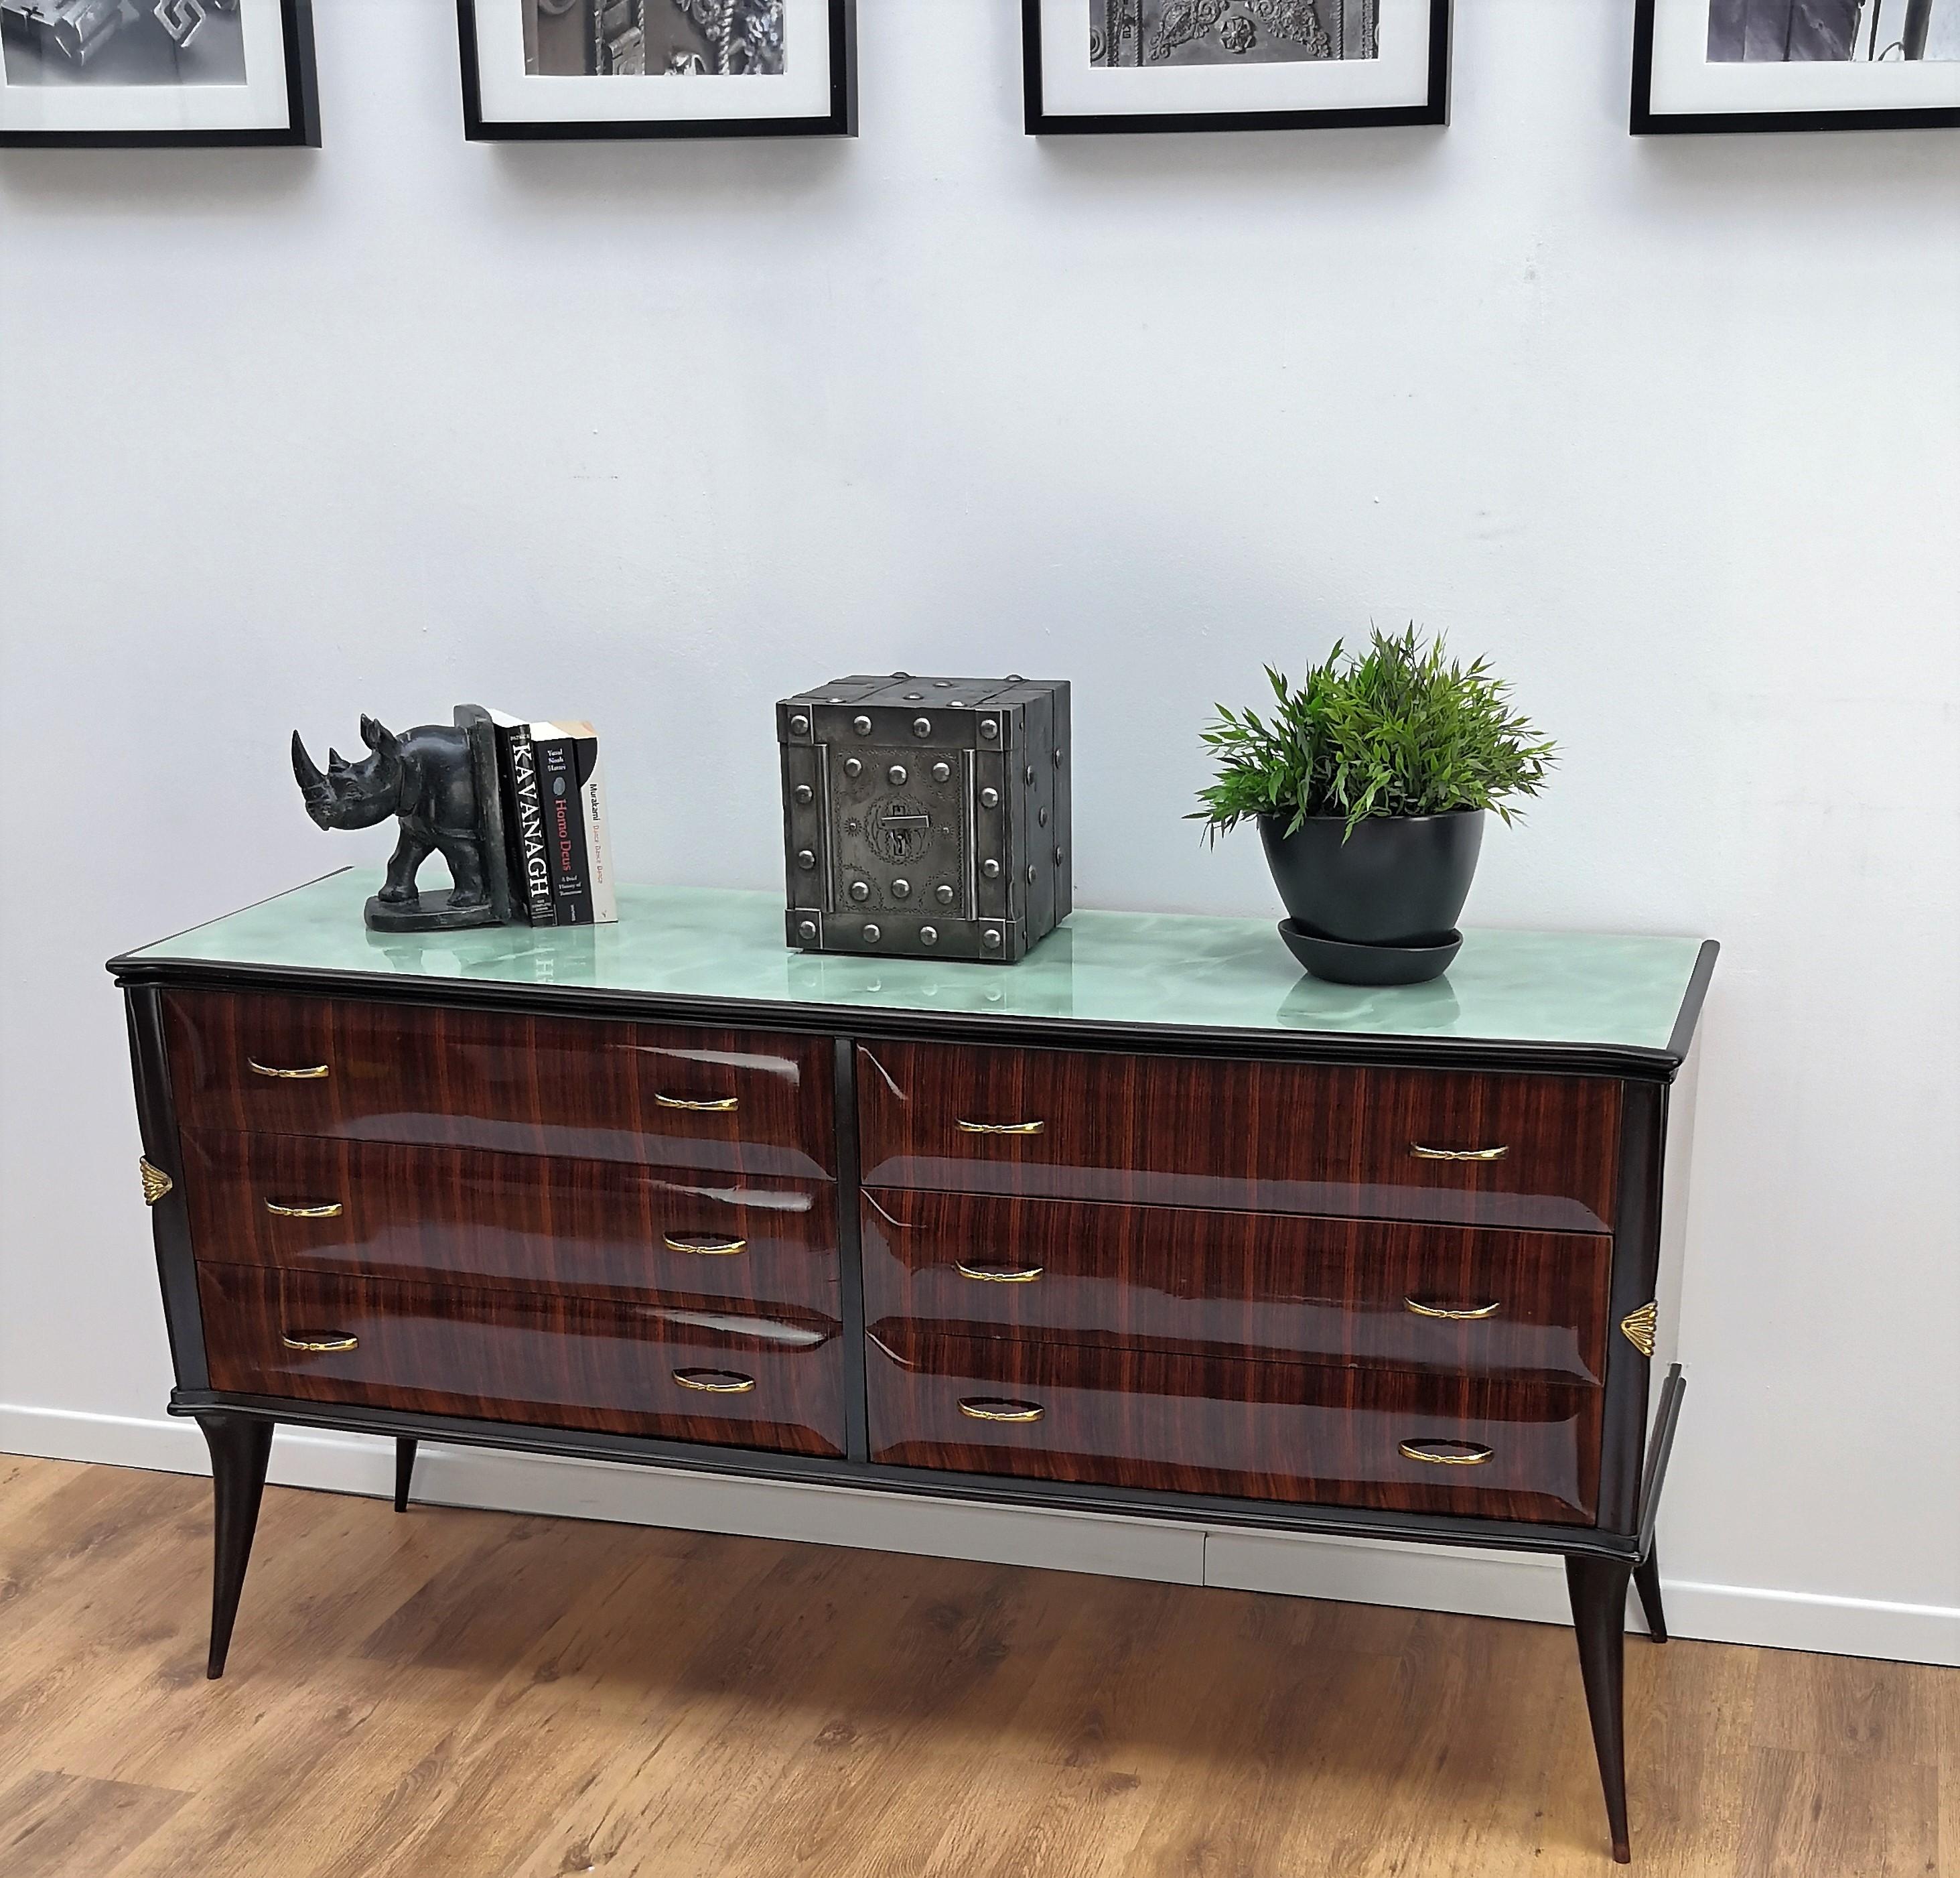 Beautiful Italian 1960s sideboard, credenza, buffet or chest of drawers in elegant and classic wood in its natural graining with gilt brass details such as the drawers handles, the legs feet and side shell decorations. This sideboard has 6 frontal